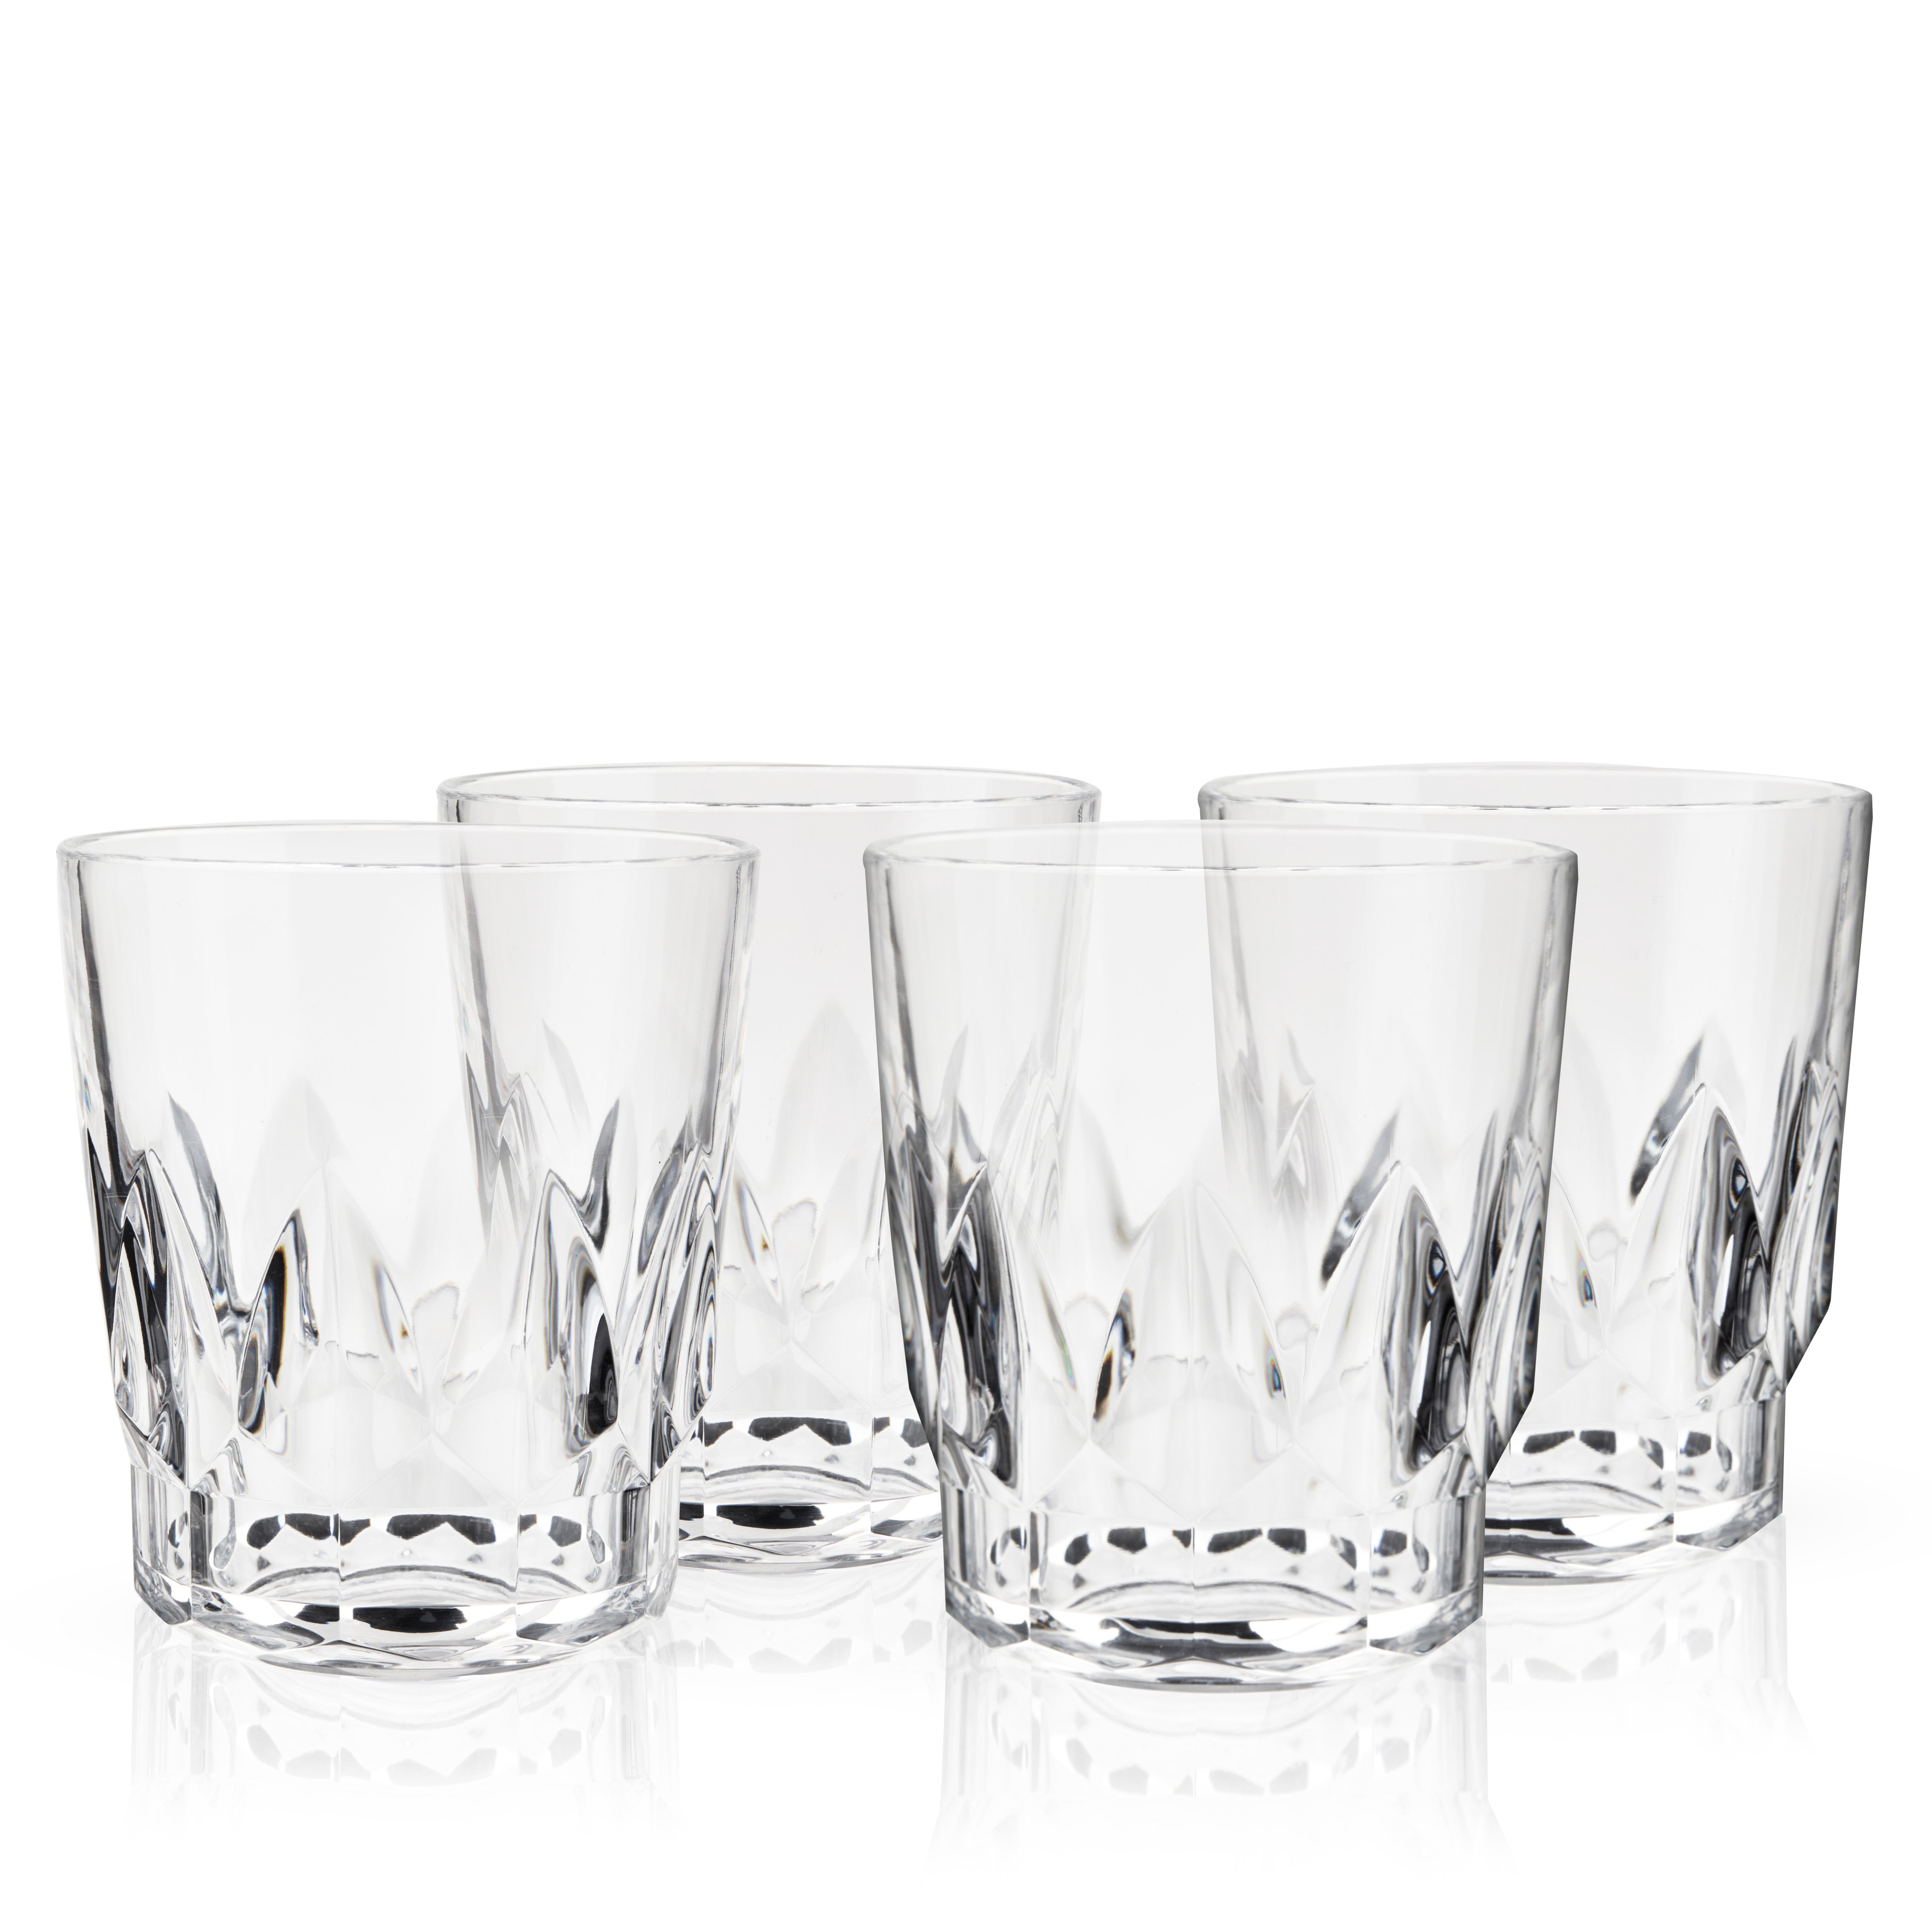 Aoibox Set of 4 12 oz. Diamond Cut Clear Quality Unbreakable Stemless Acrylic Drinking Glasses